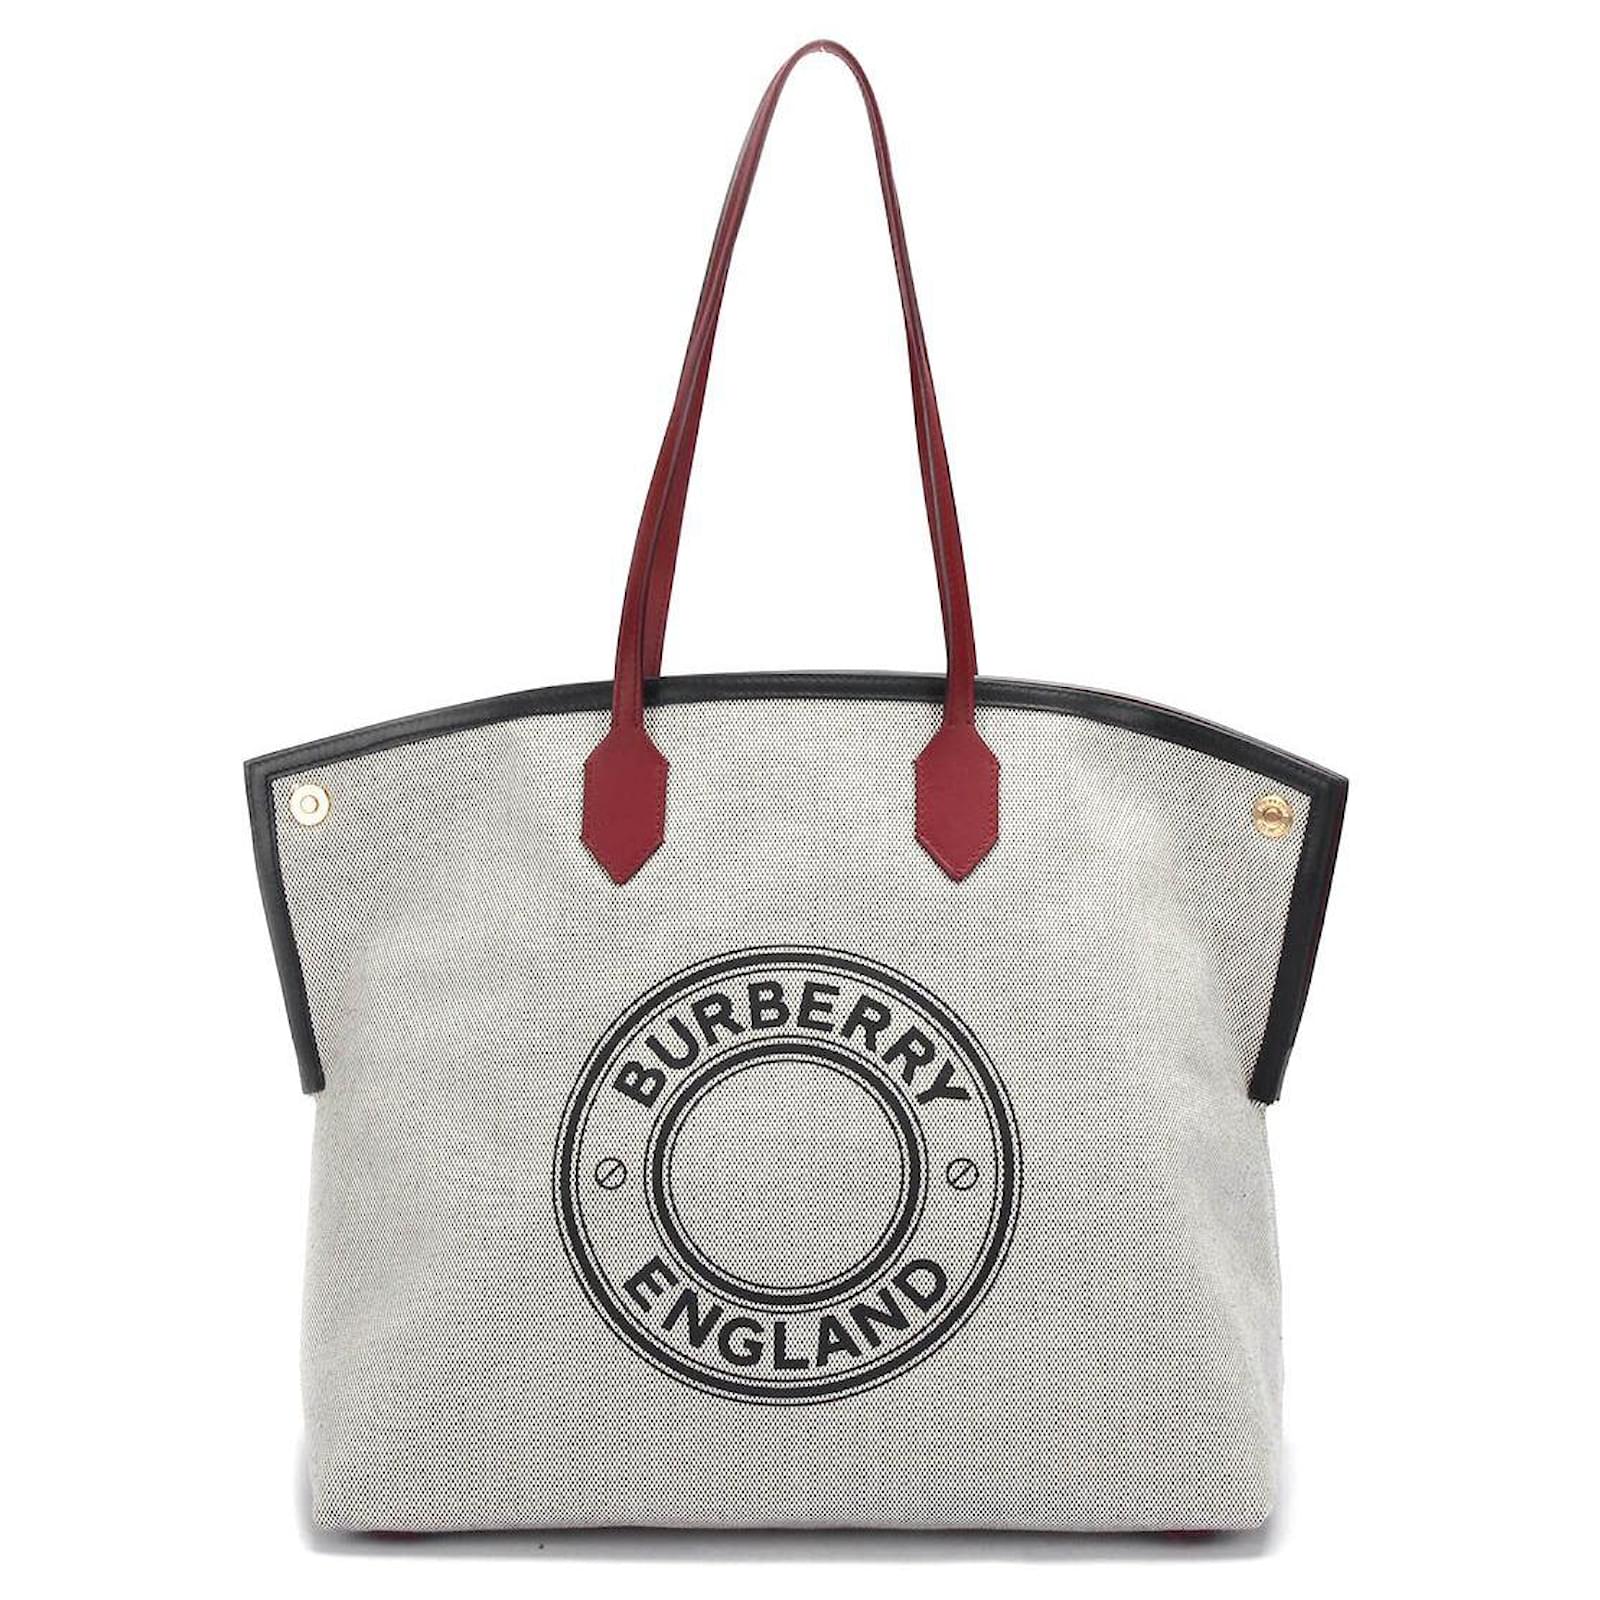 Burberry Large Society Tote